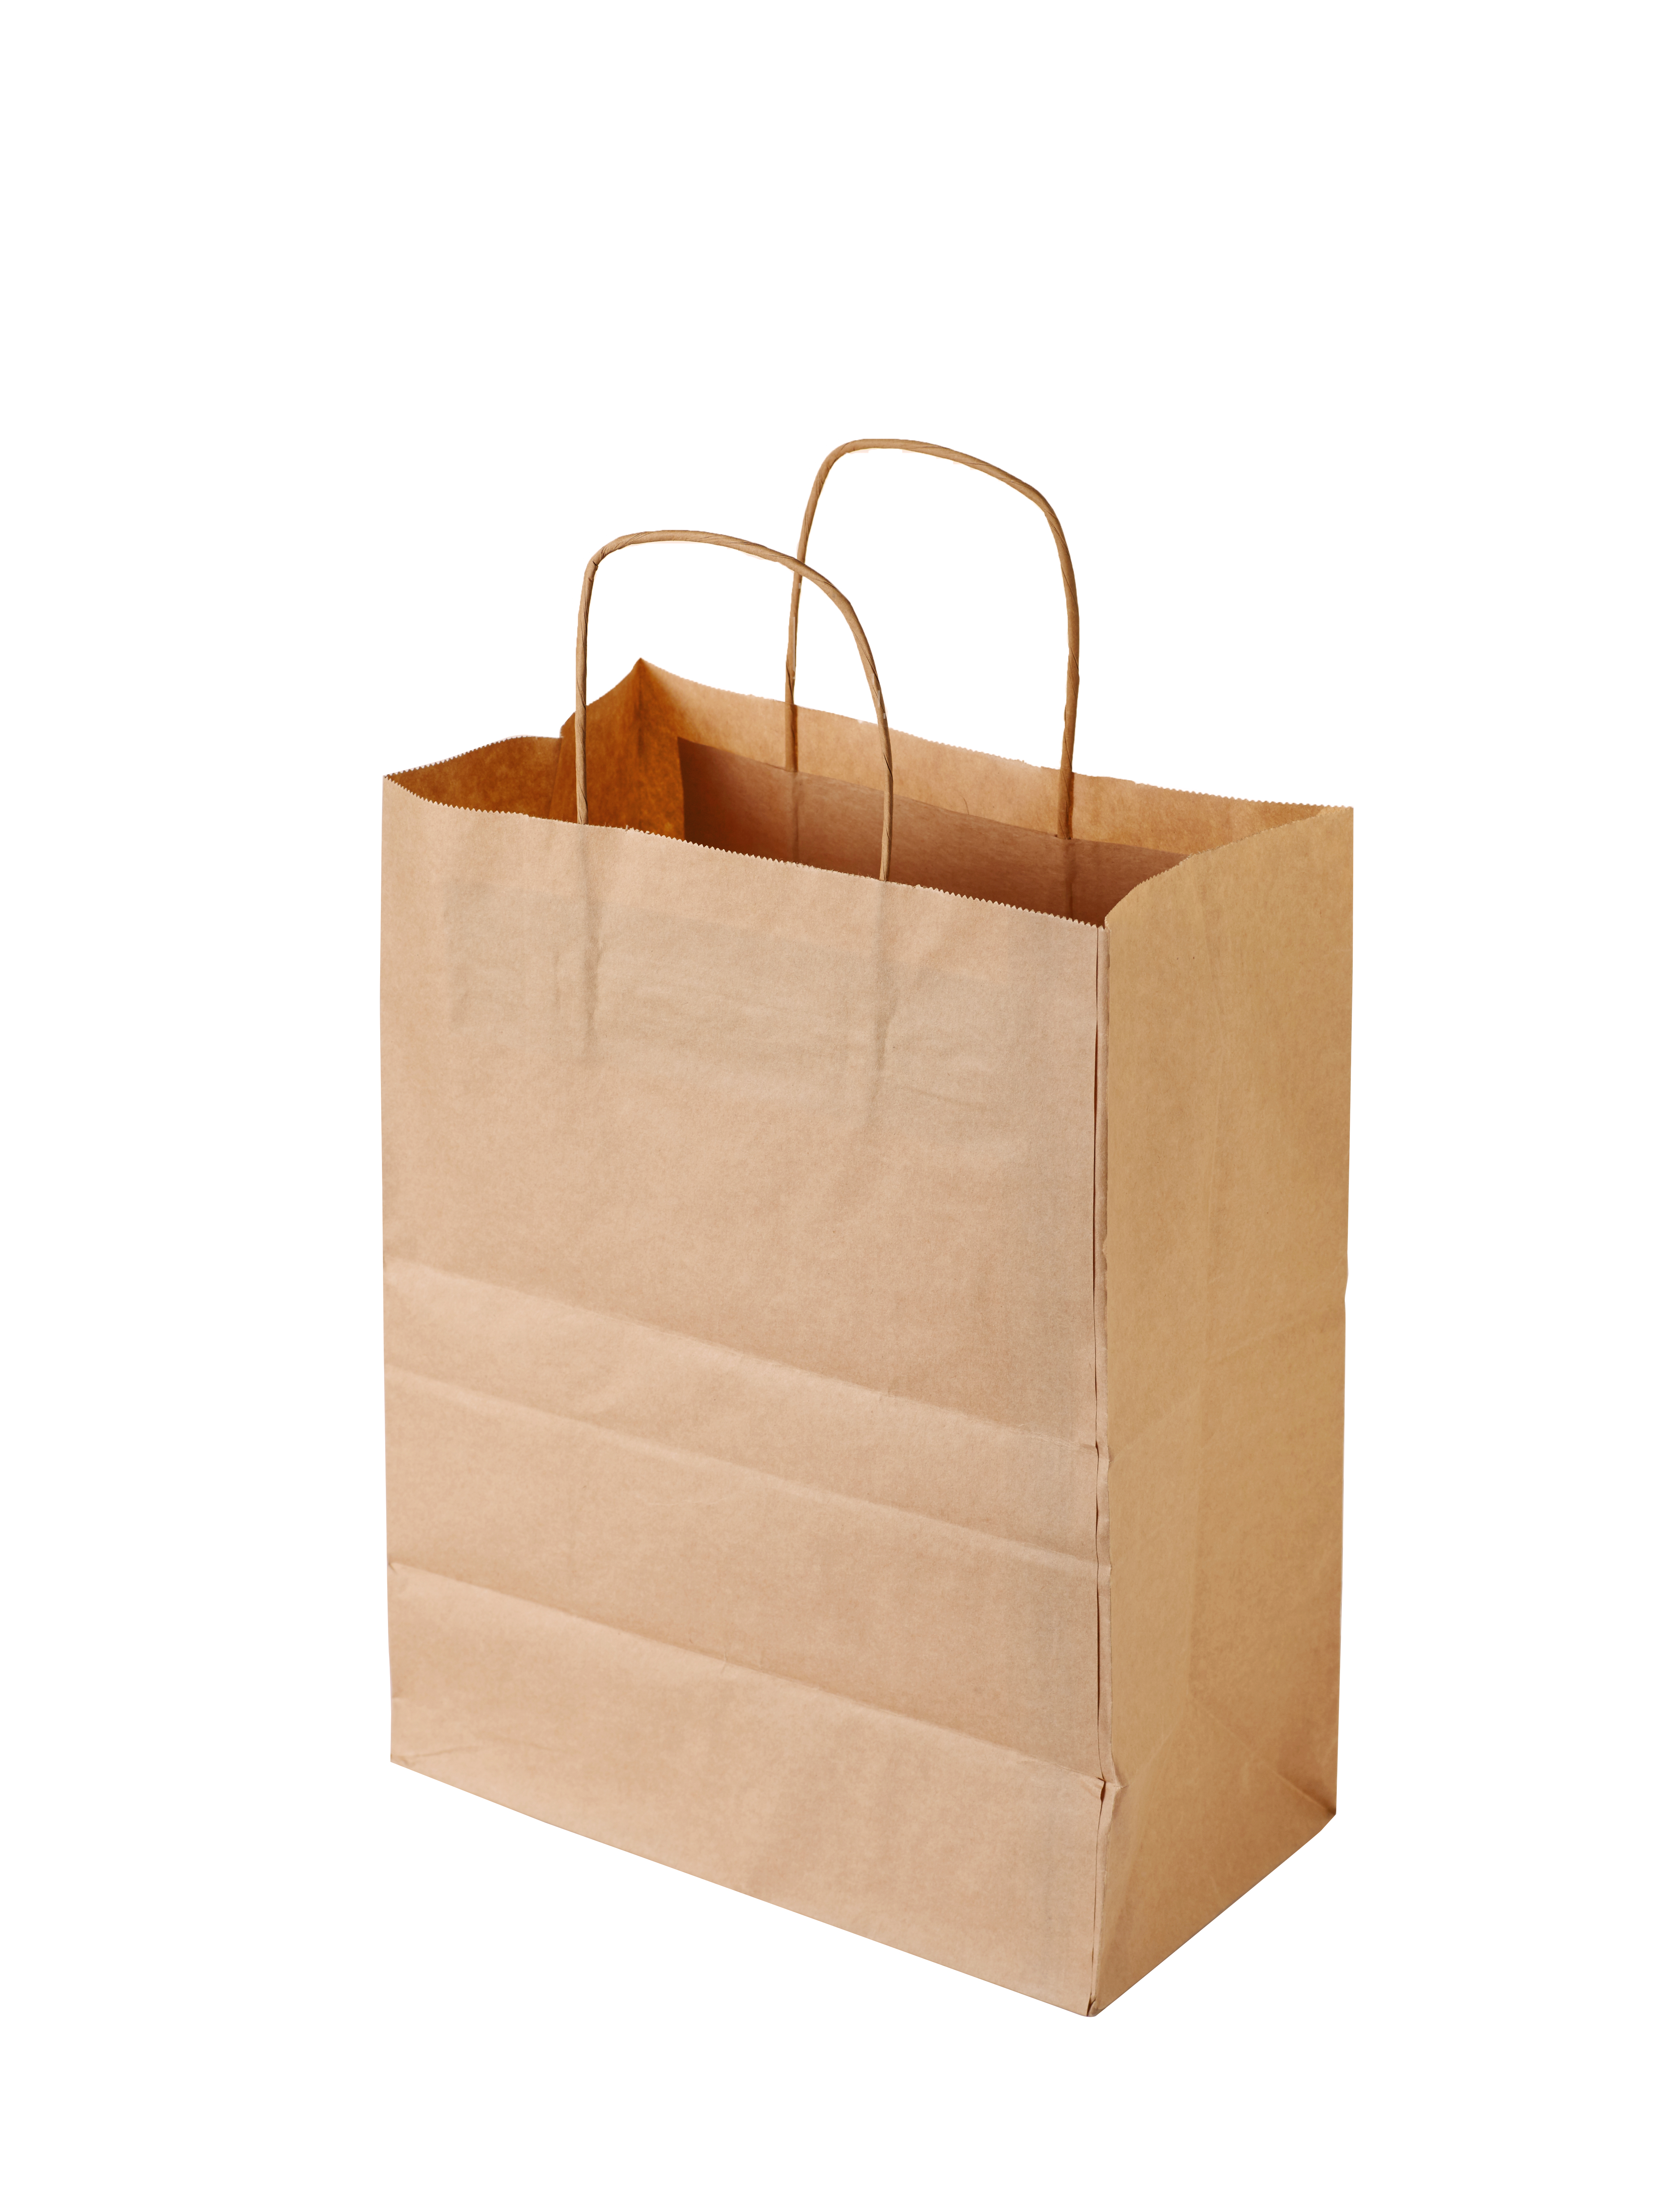 OSQ CarrBag tw 350 paper bags with handles